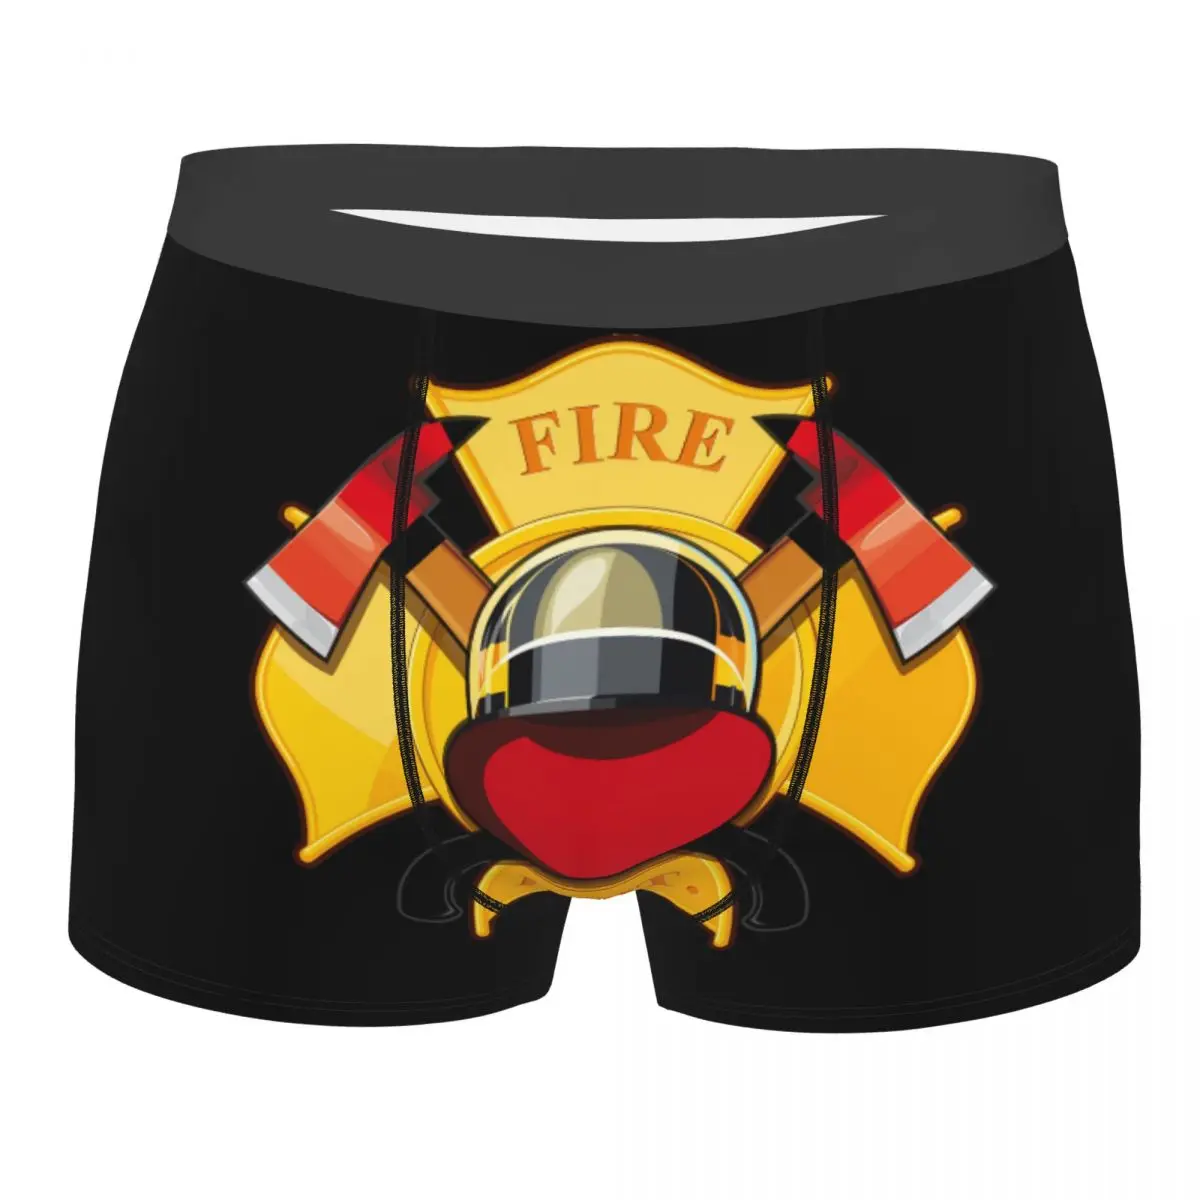 firefighter Fire Department Badge Mencosy Boxer Briefs Underpants Highly Breathable High Quality Birthday Gifts red fire department badge fireman men women socks windproof applicable throughout the year dressing gifts